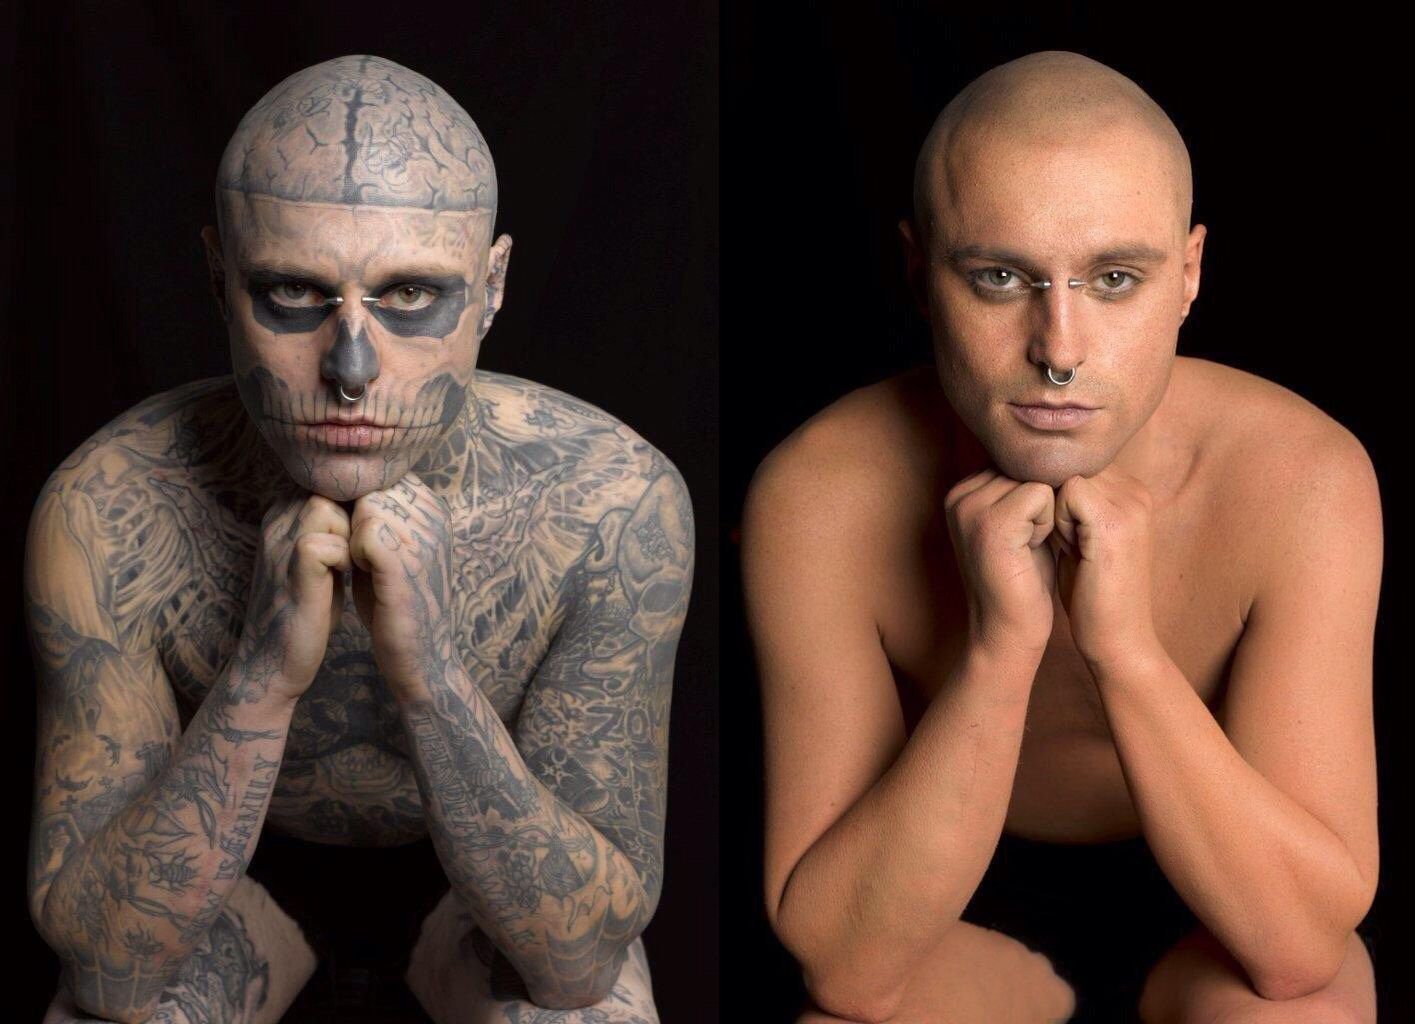 1. Rick Genest, also known as "Zombie Boy", holds the Guinness World Record for most tattoos on a human body. - wide 5